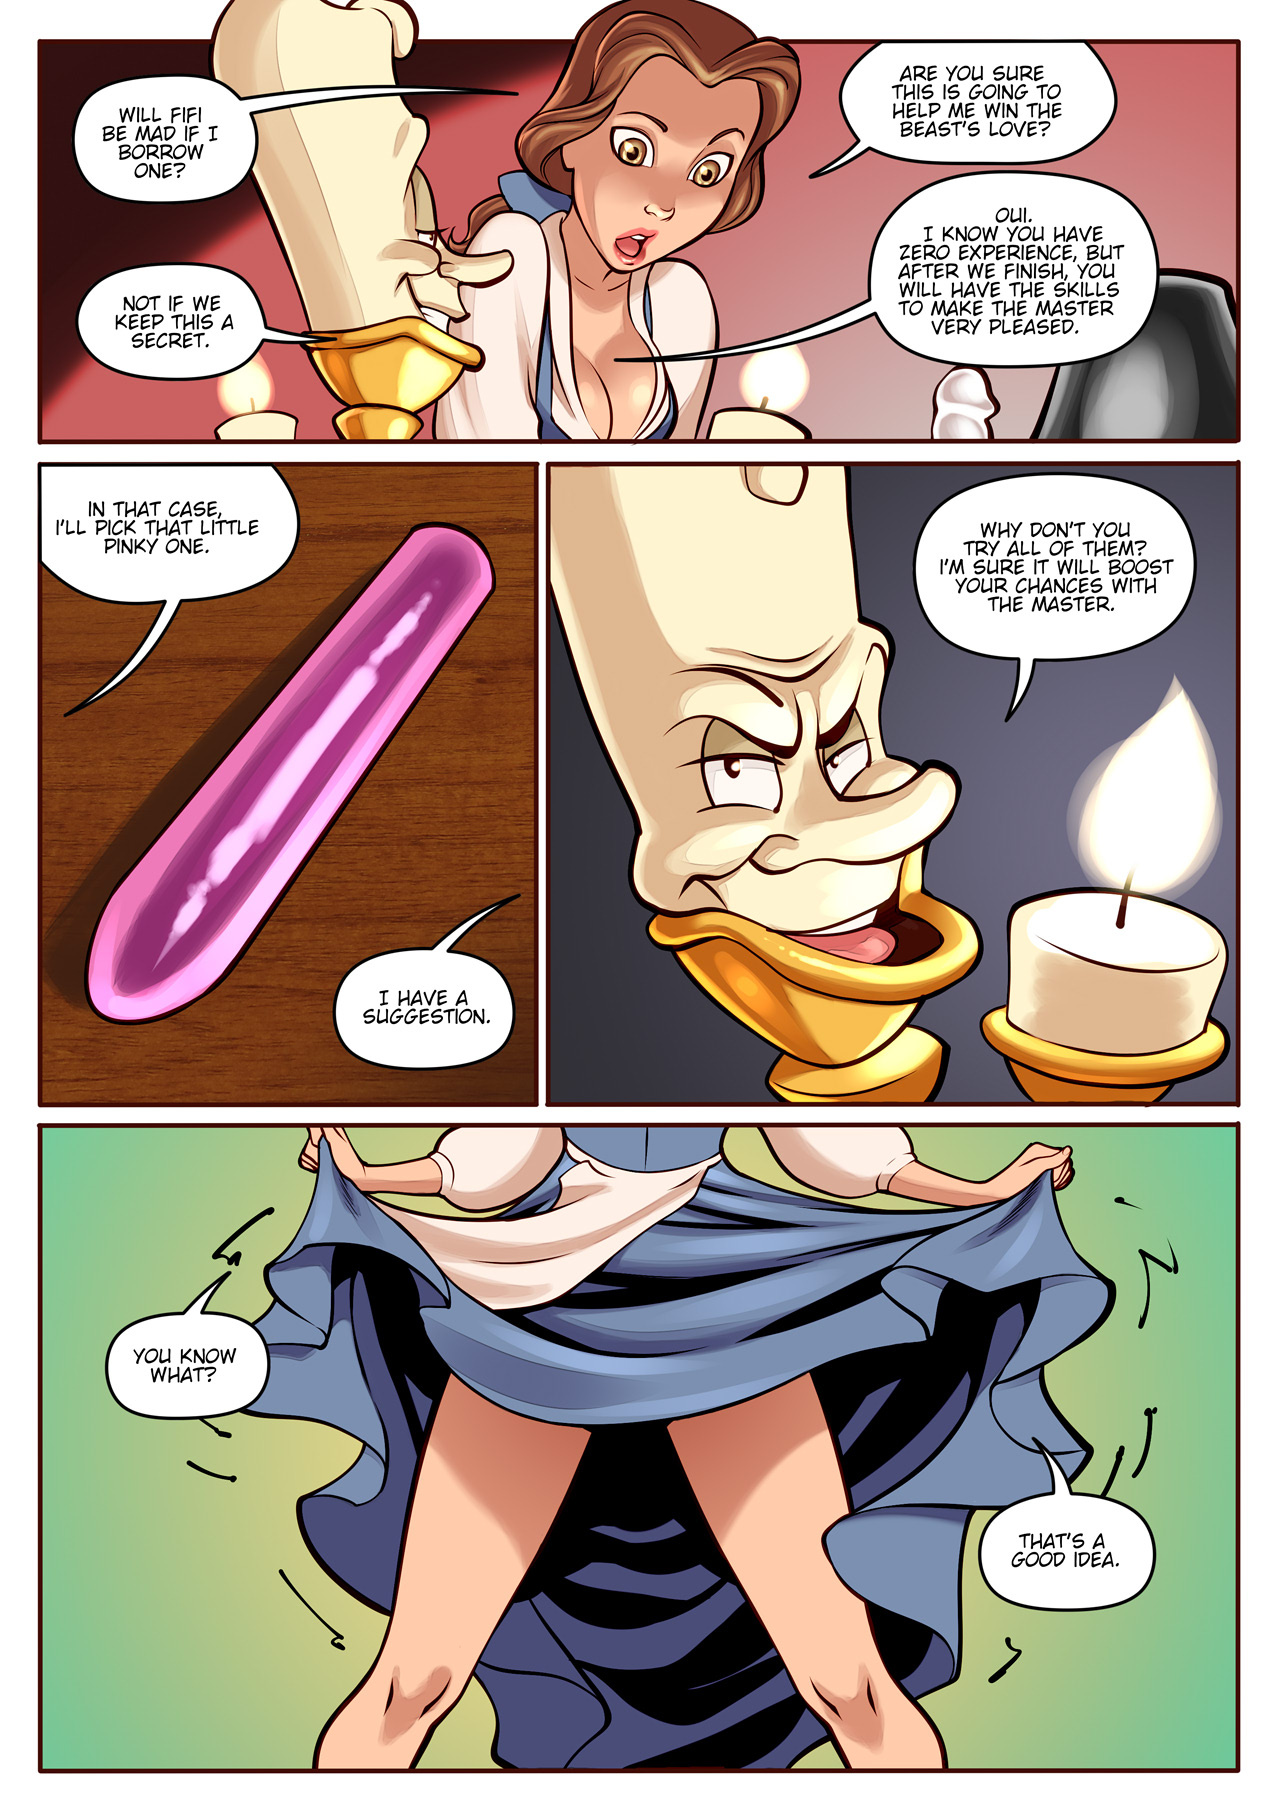 To Tame the Beast porn comics Anal Sex, Creampie, cunnilingus, Fantasy, Sex and Magic, Sex Toys, Straight, X-Ray